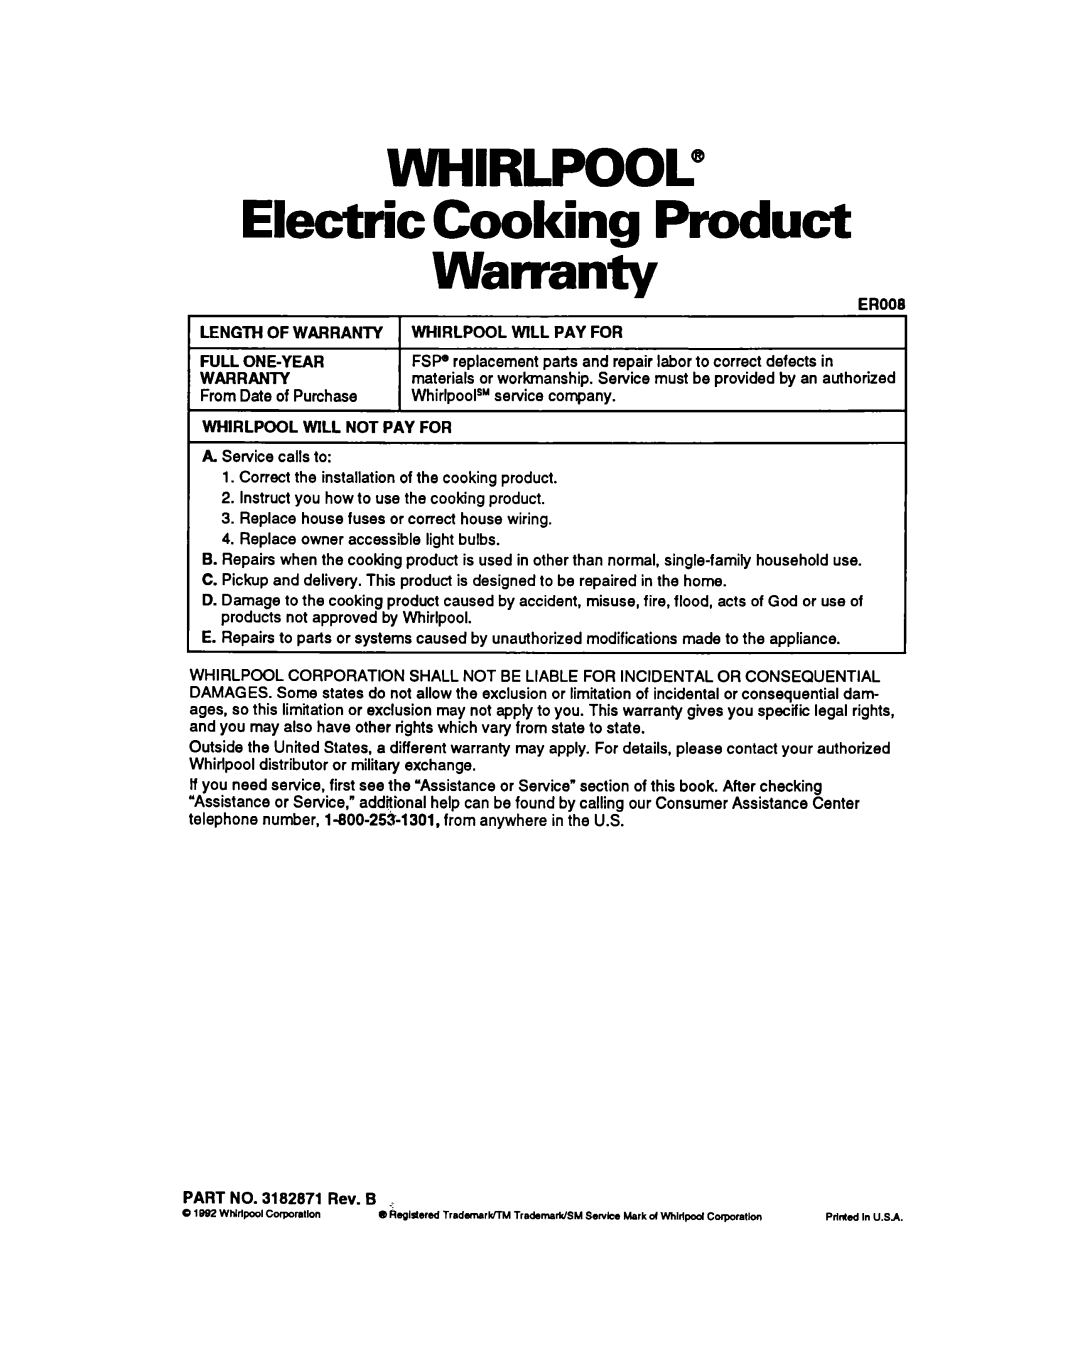 Whirlpool RB770PXY, RB270PXY, RB760PXY, RB17OPXY, RB260PXY, RBIGOPXY warranty WHIRLPOOL@ Electric Cooking Product Warranty 